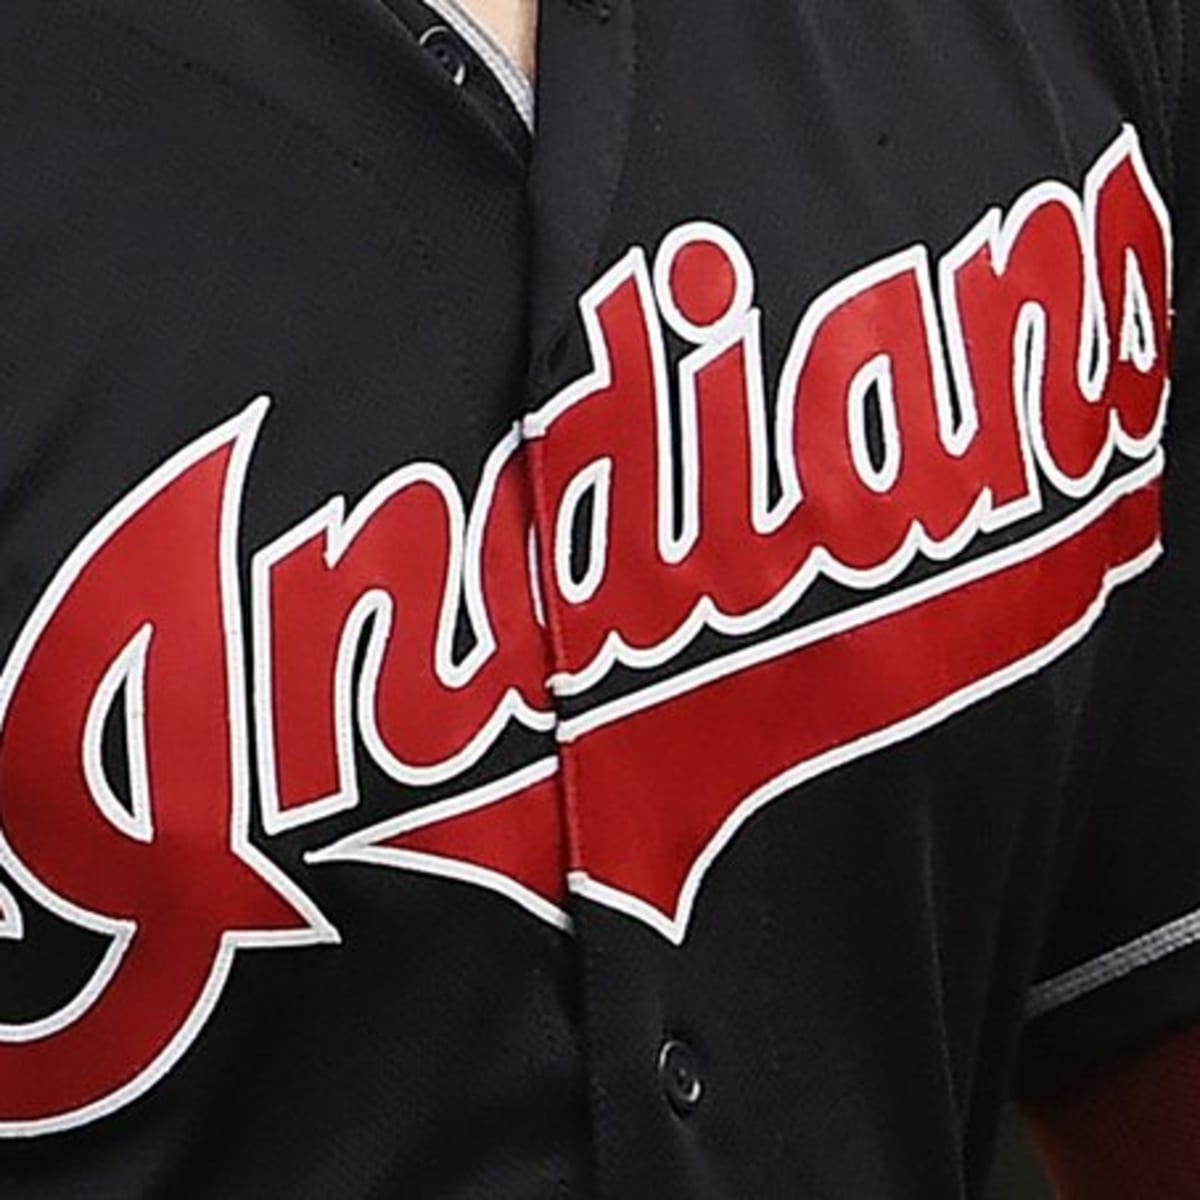 Cleveland Indians Finally Ditching Chief Wahoo Logo